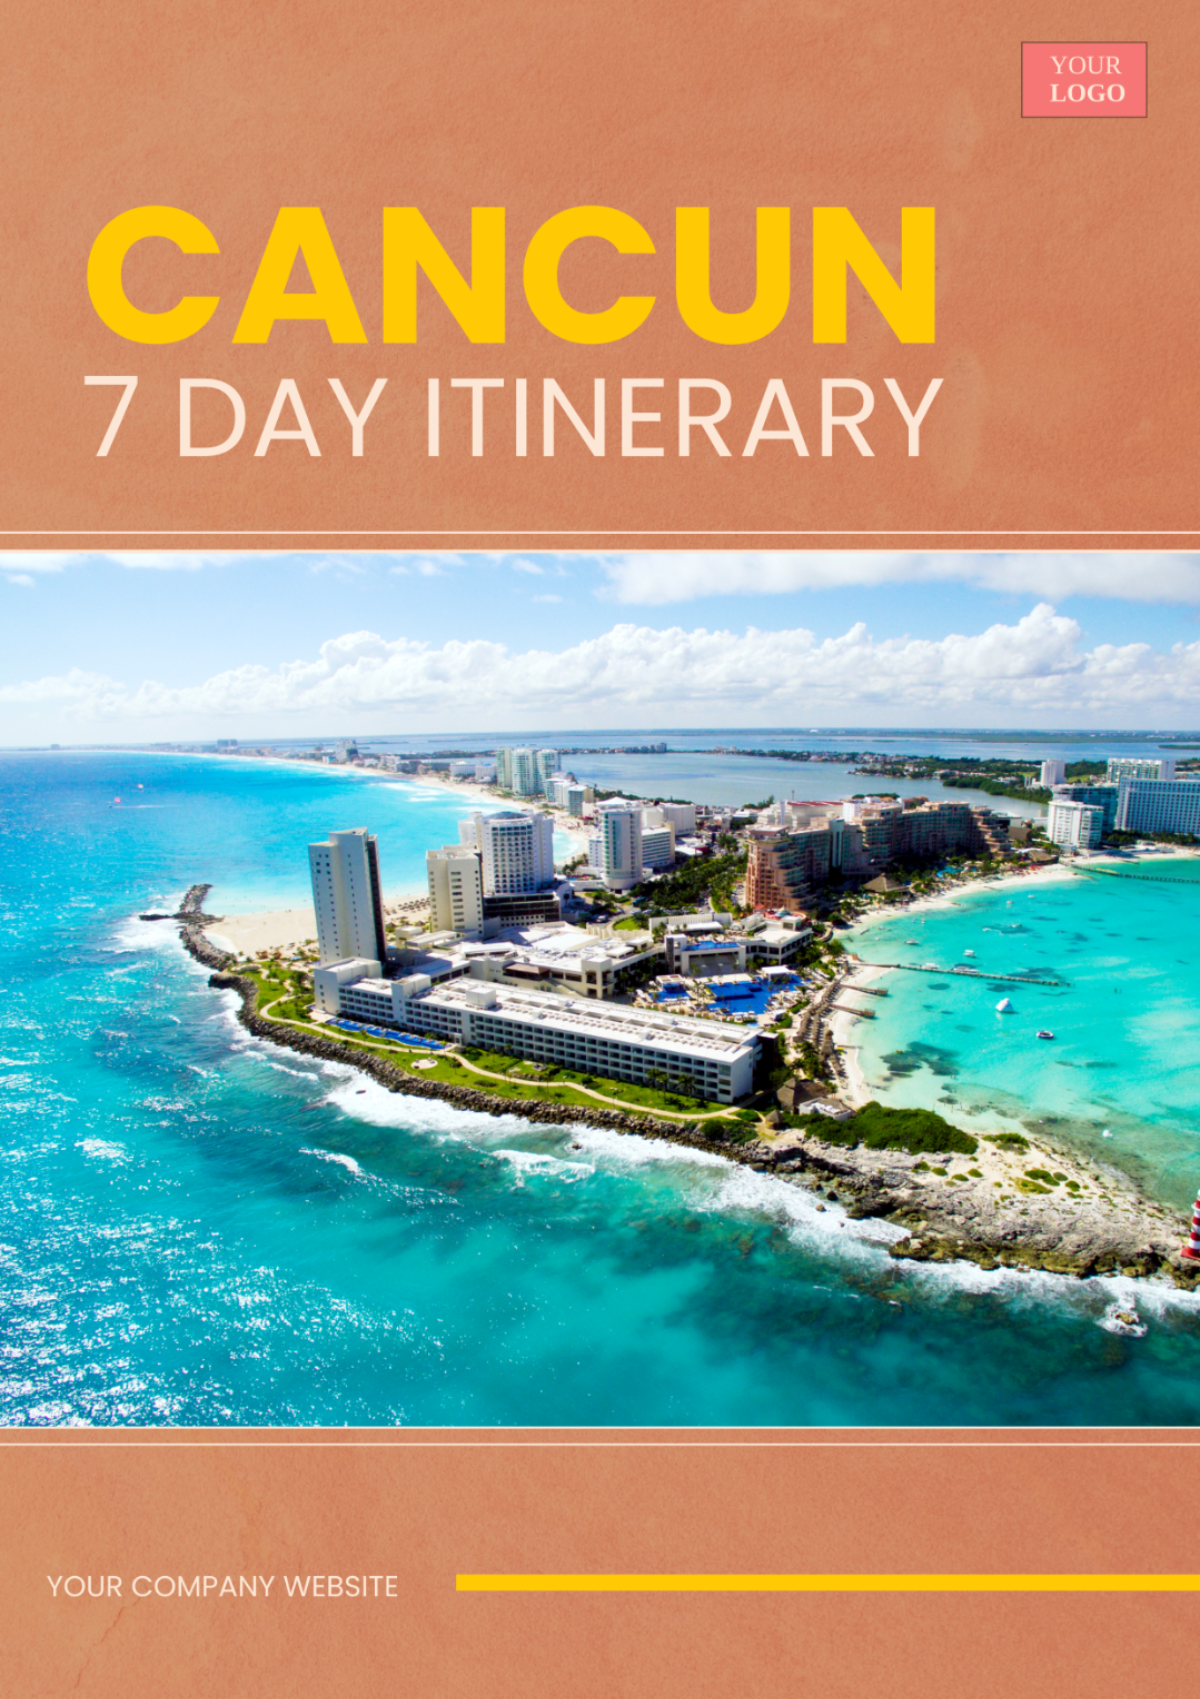 7 Day Cancun Itinerary Template